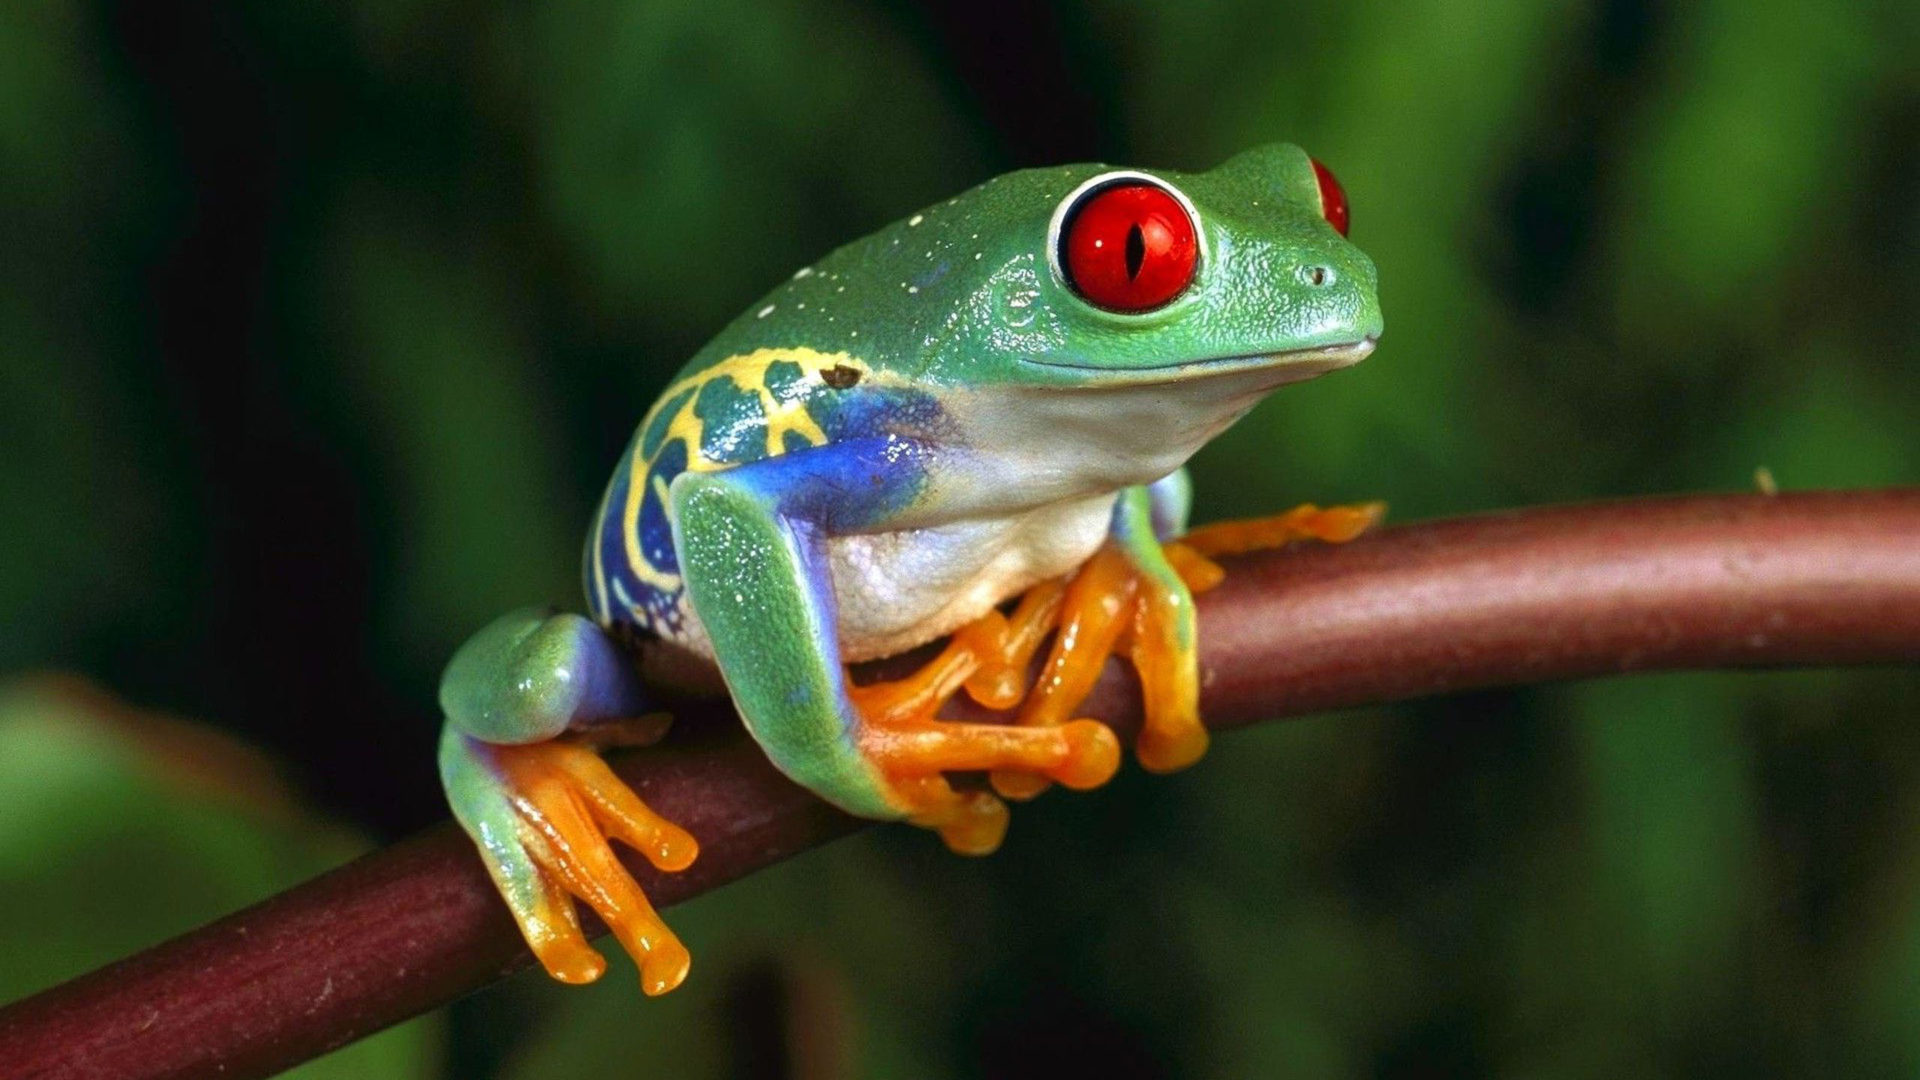 Green Frog With Red Eyes 4k Ultra Wallpaper For Computer